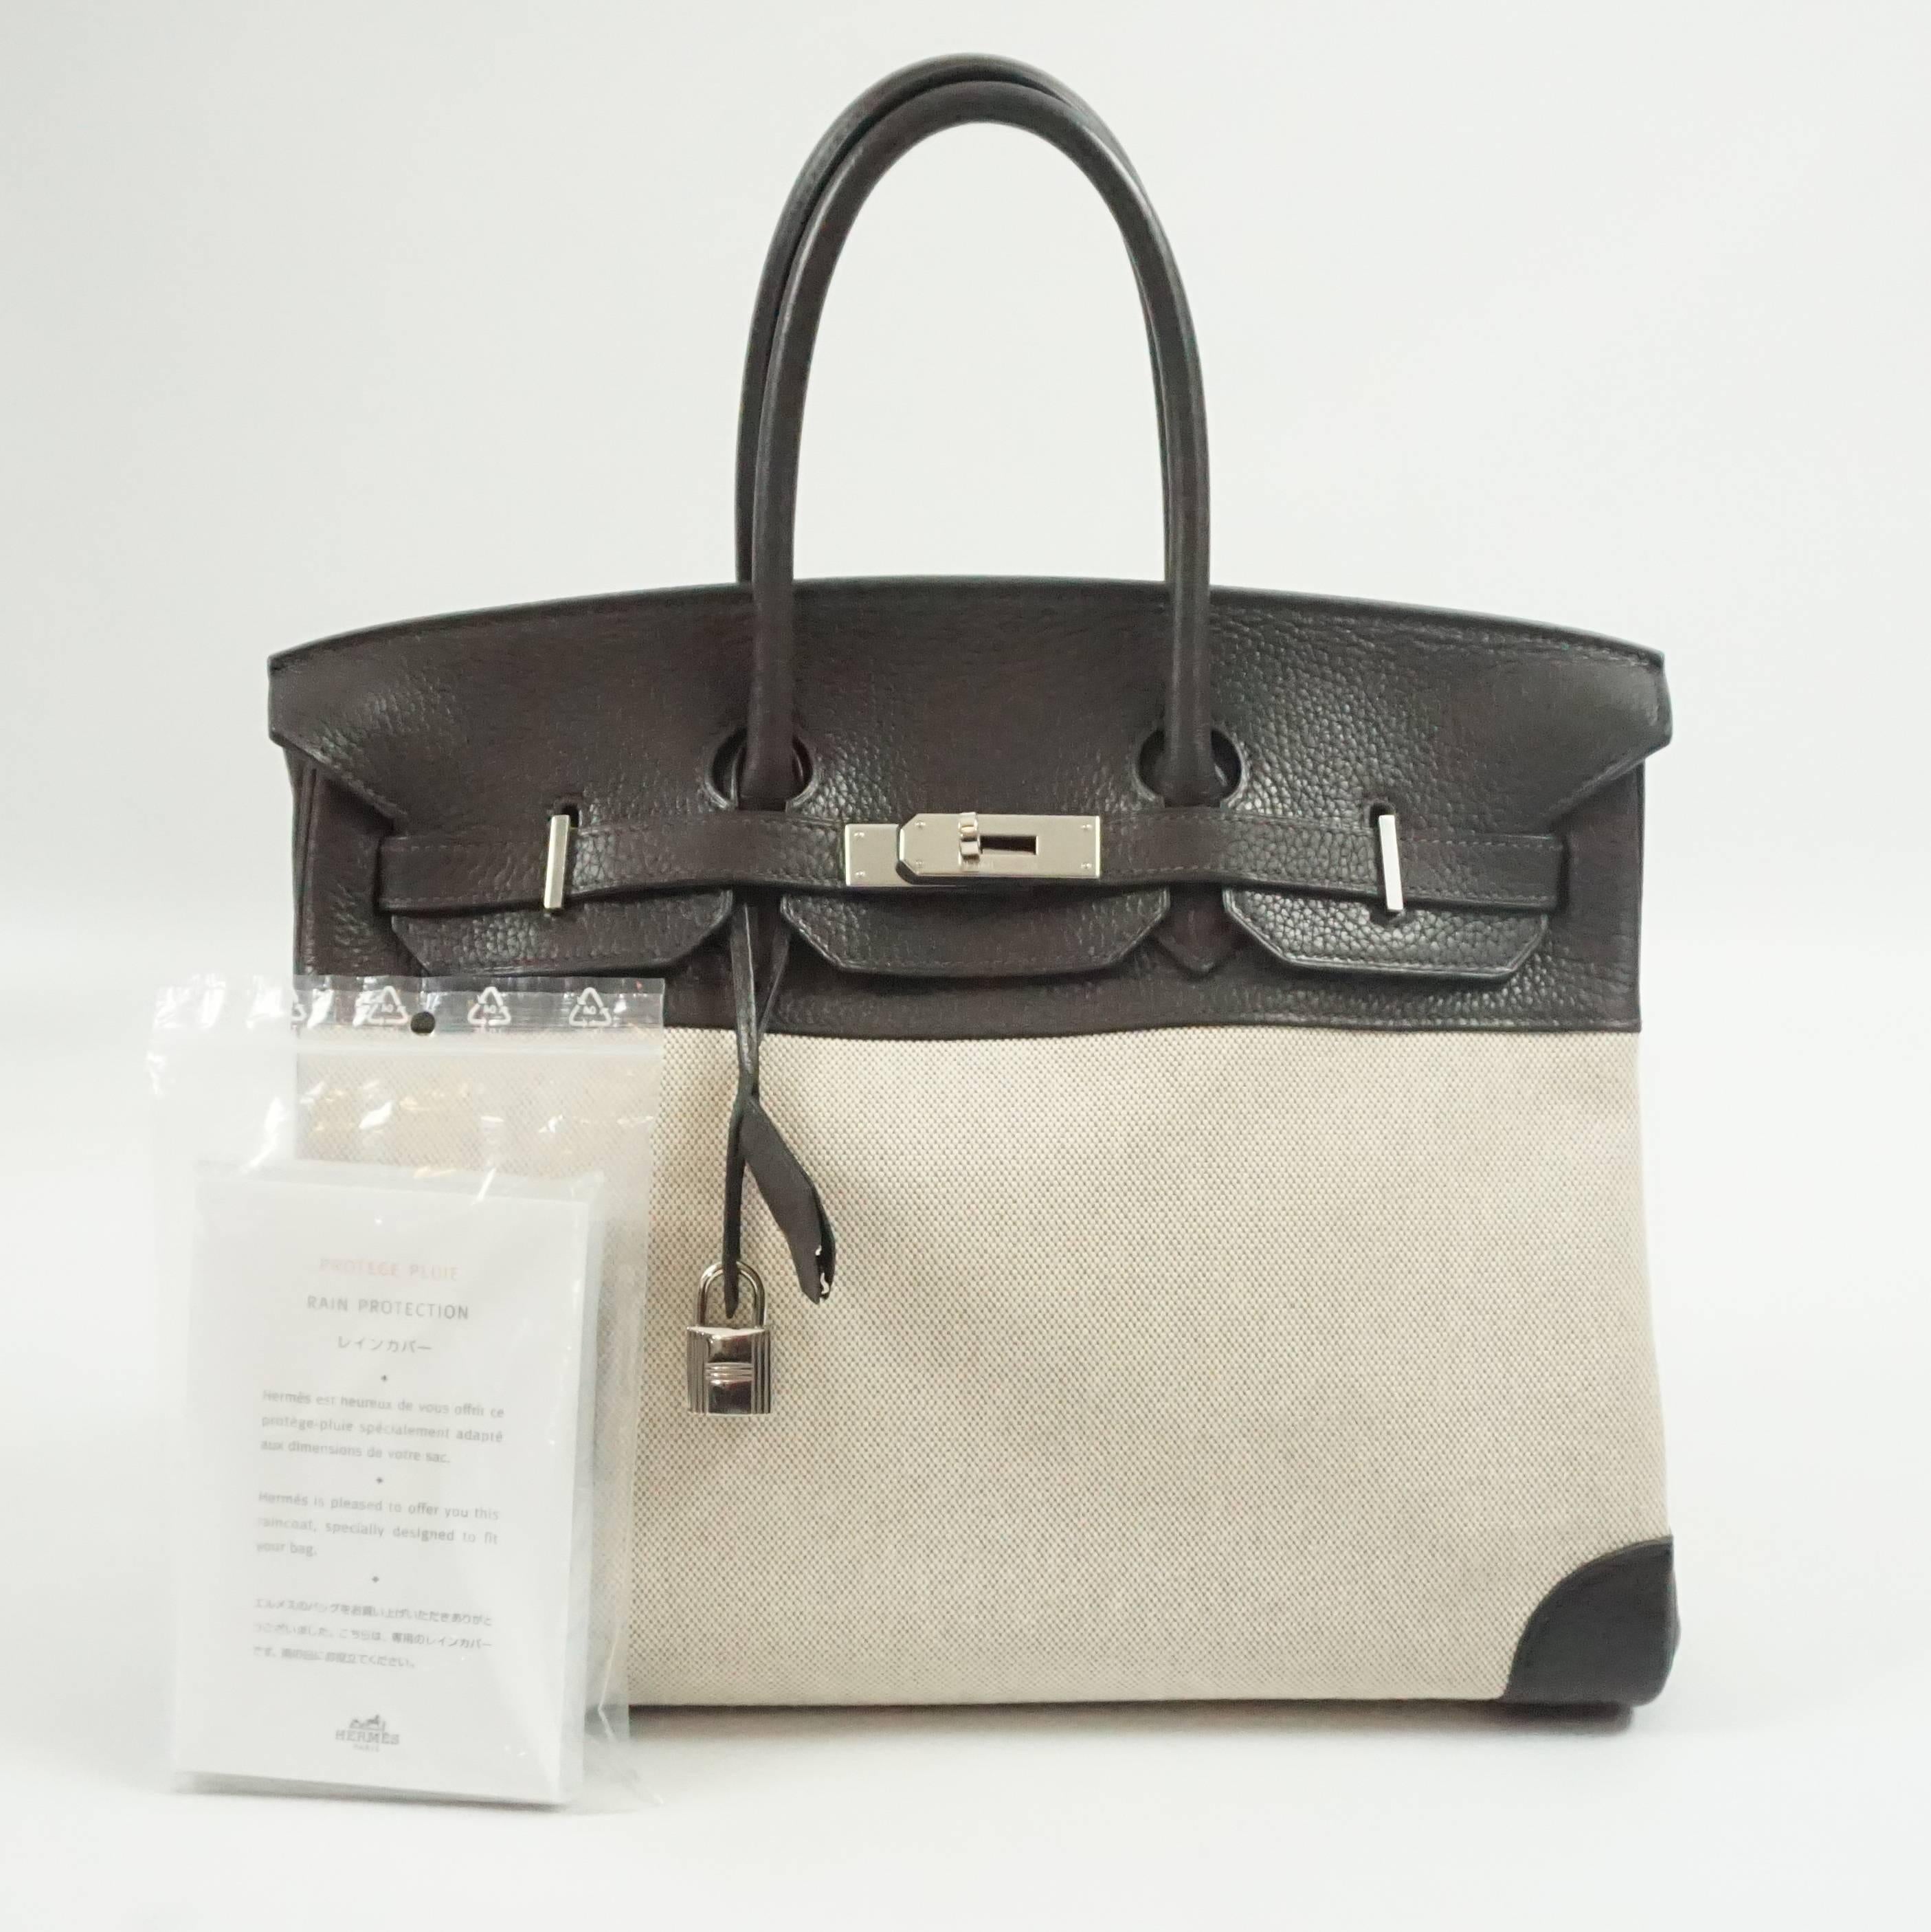 Hermes Canvas and Chocolate Brown Leather 35cm Birkin - SHW - 2006 1